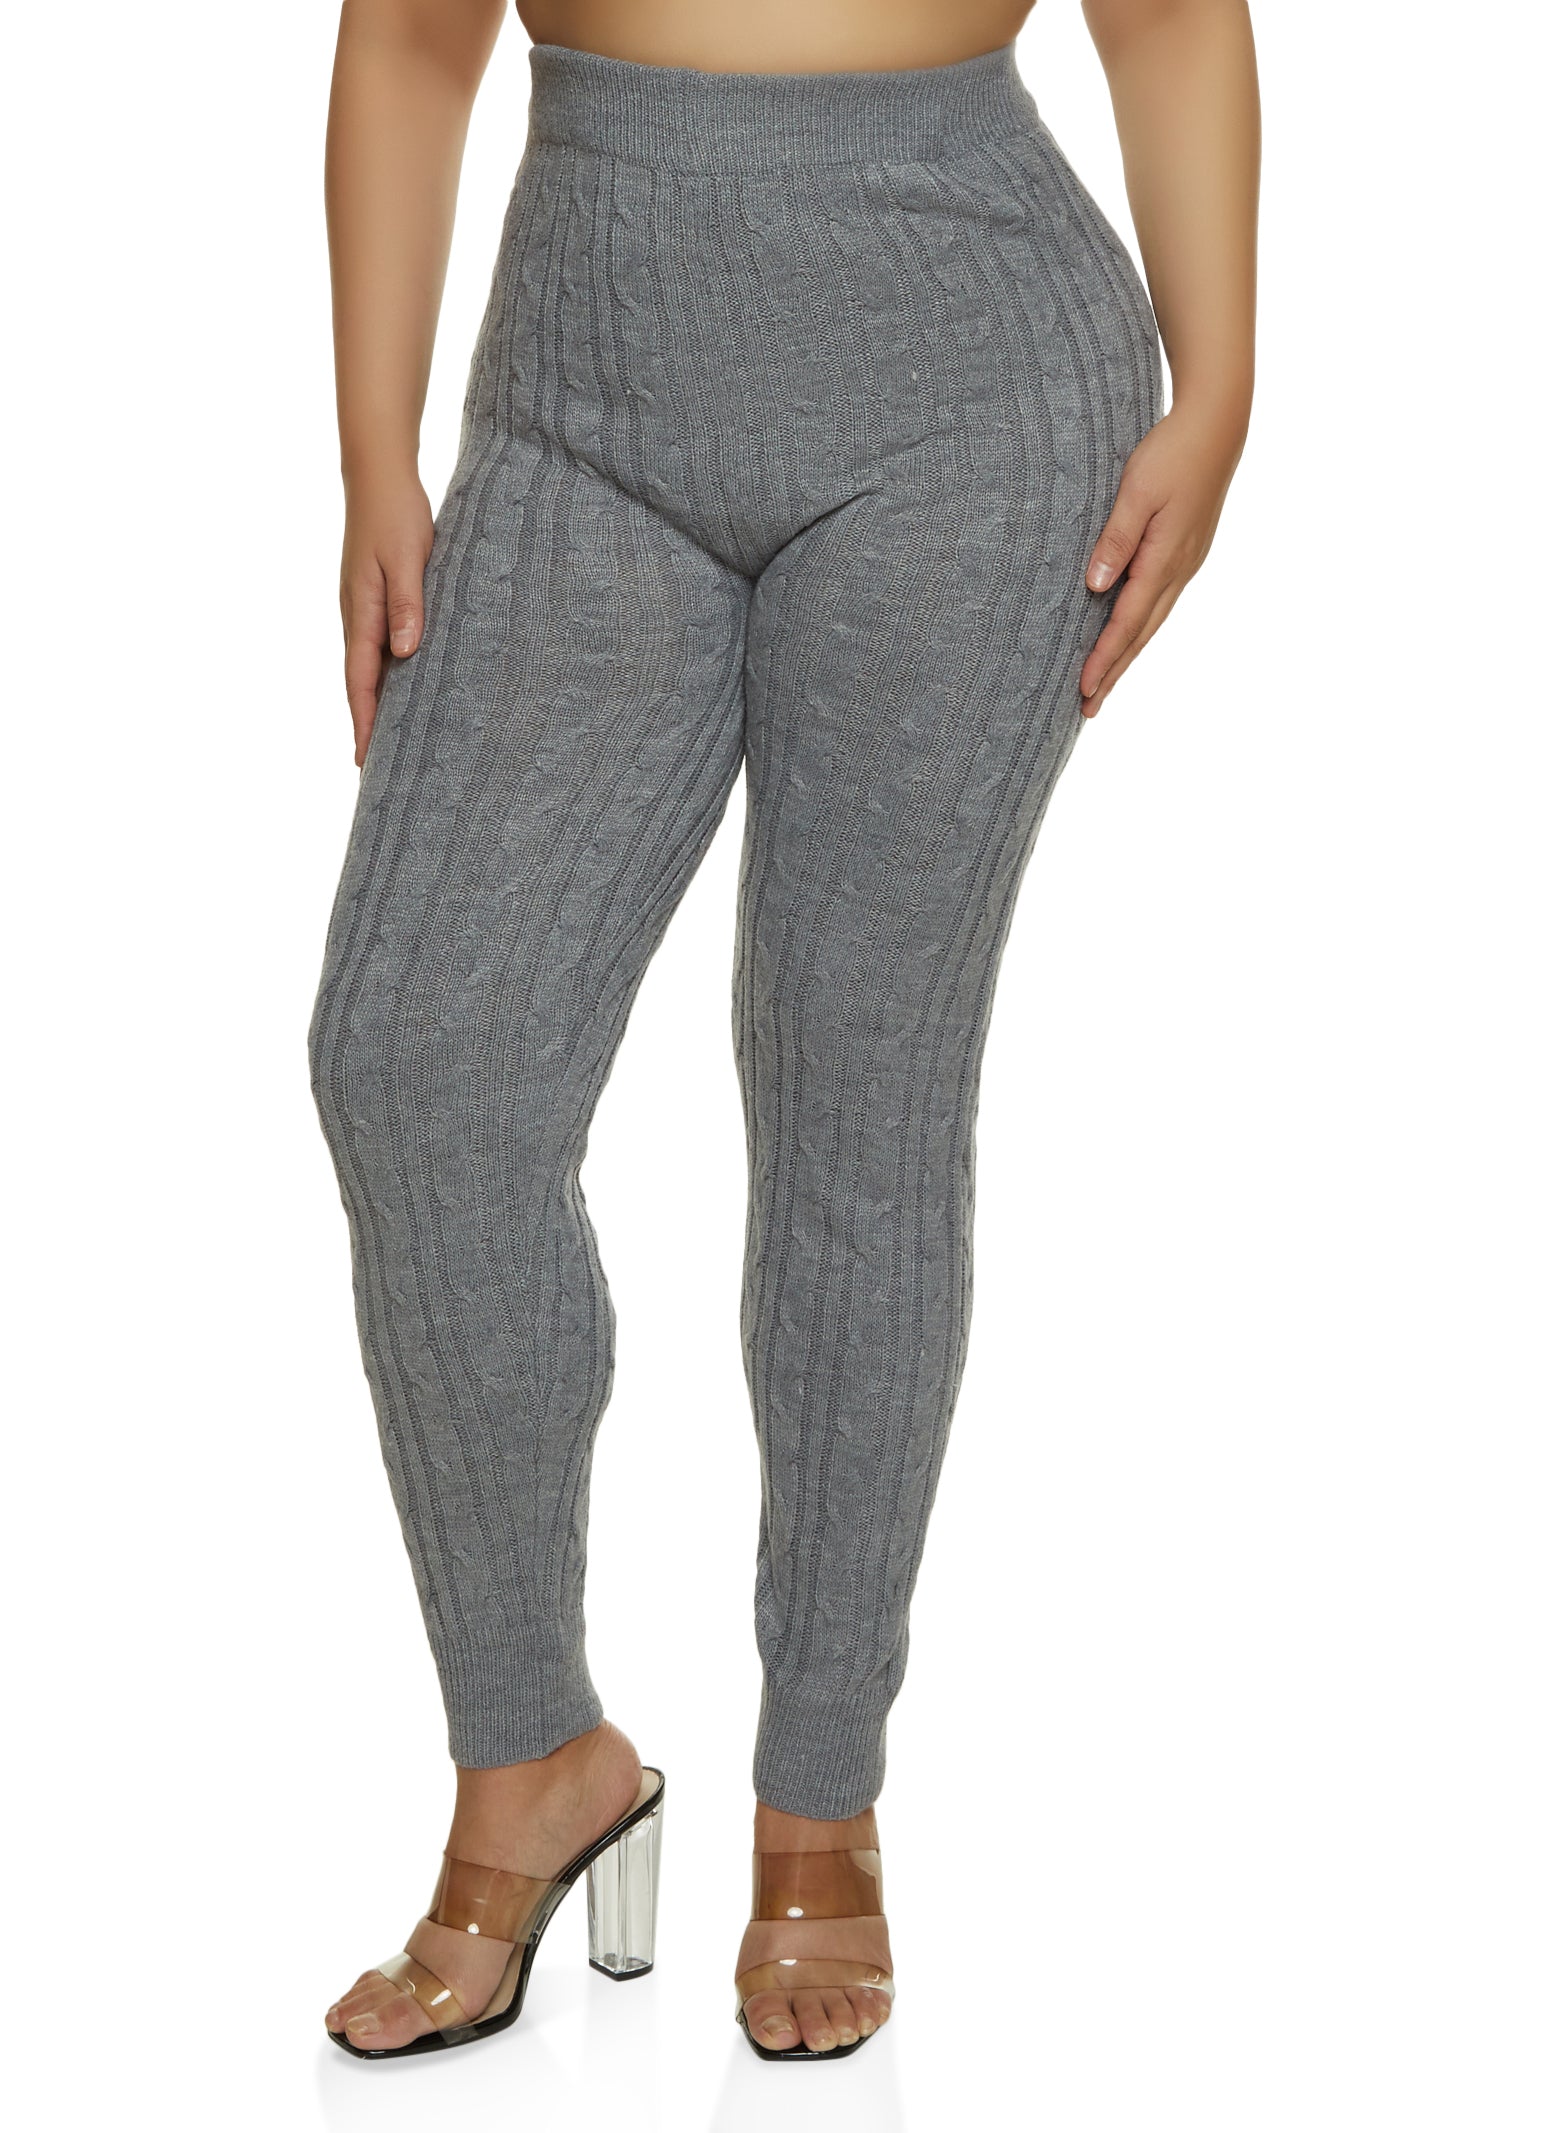 Womens Plus Size Cable Knit Skinny Pants, Grey, Size 2X